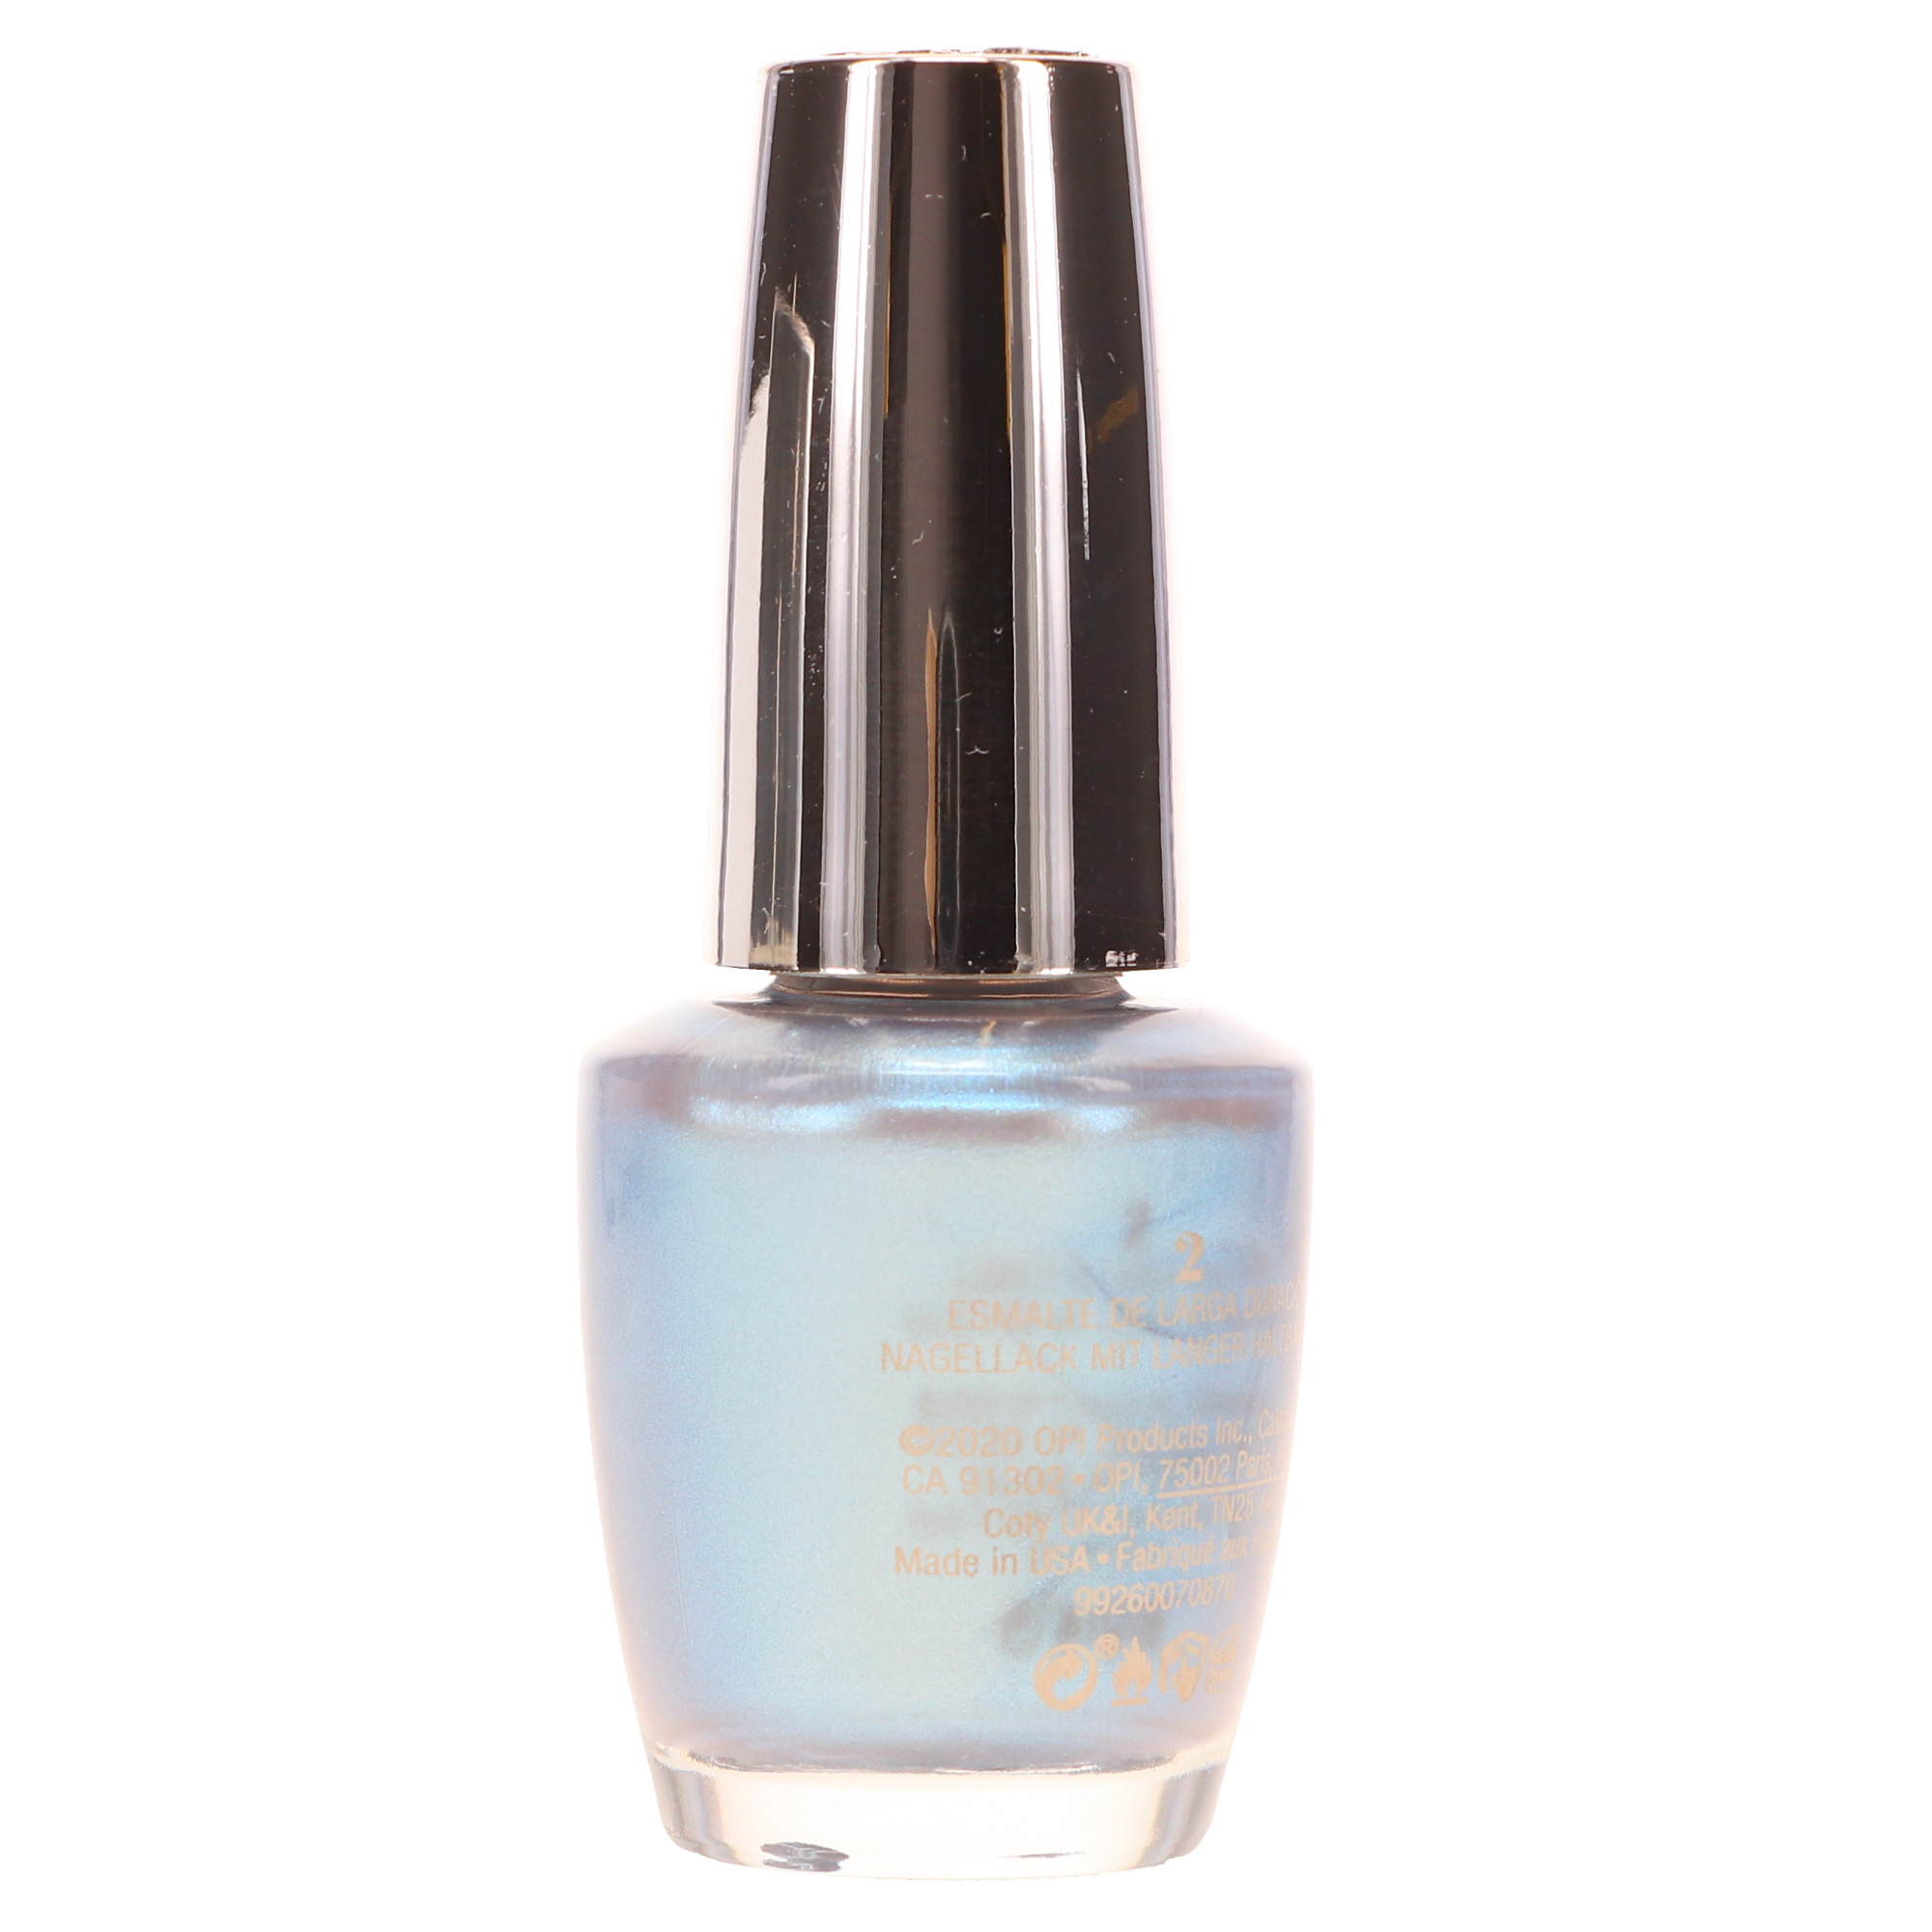 OPI Infinite Shine This Color Hits All The High Notes 0.5 oz - LaLa Daisy